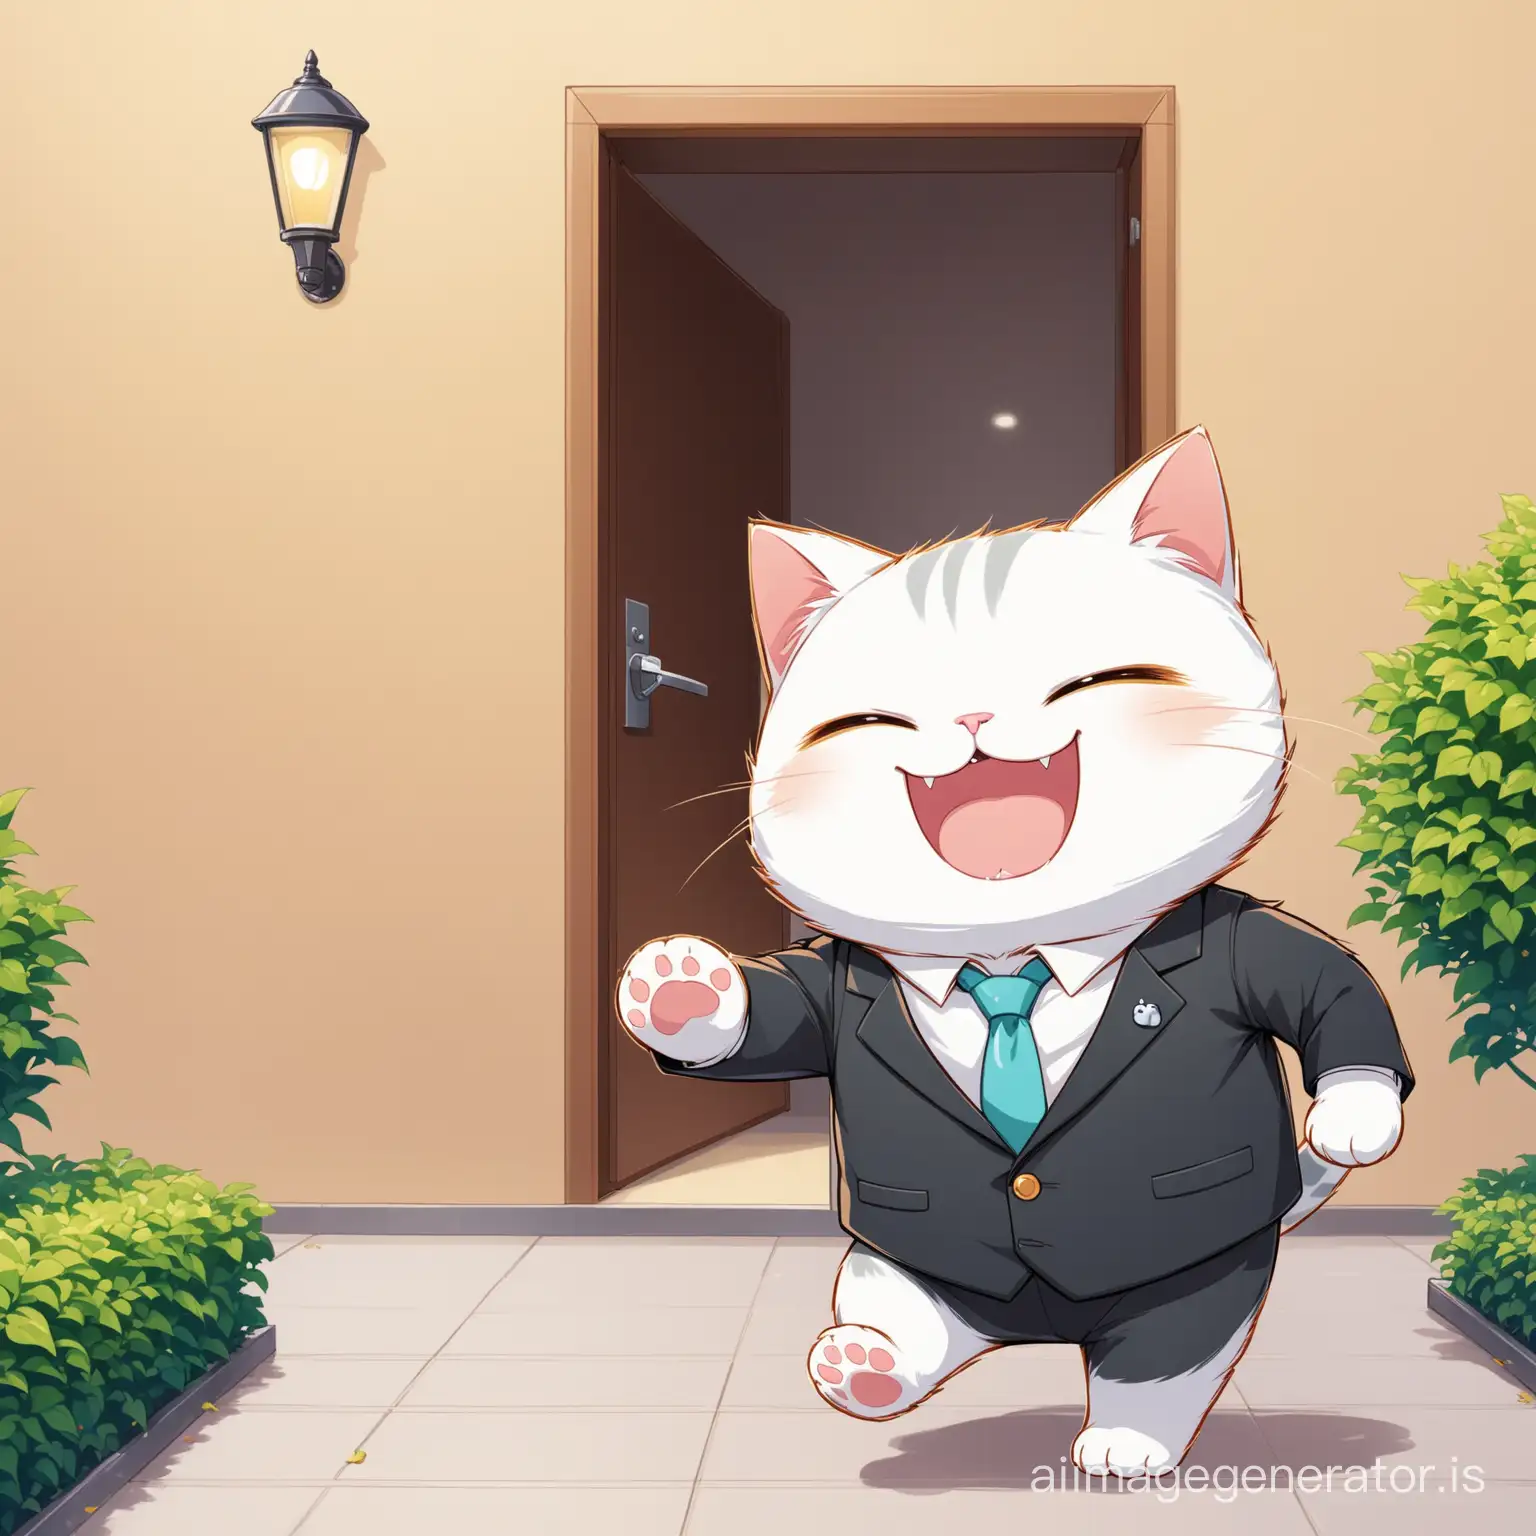 The cat wears a suit and happily enters the company building